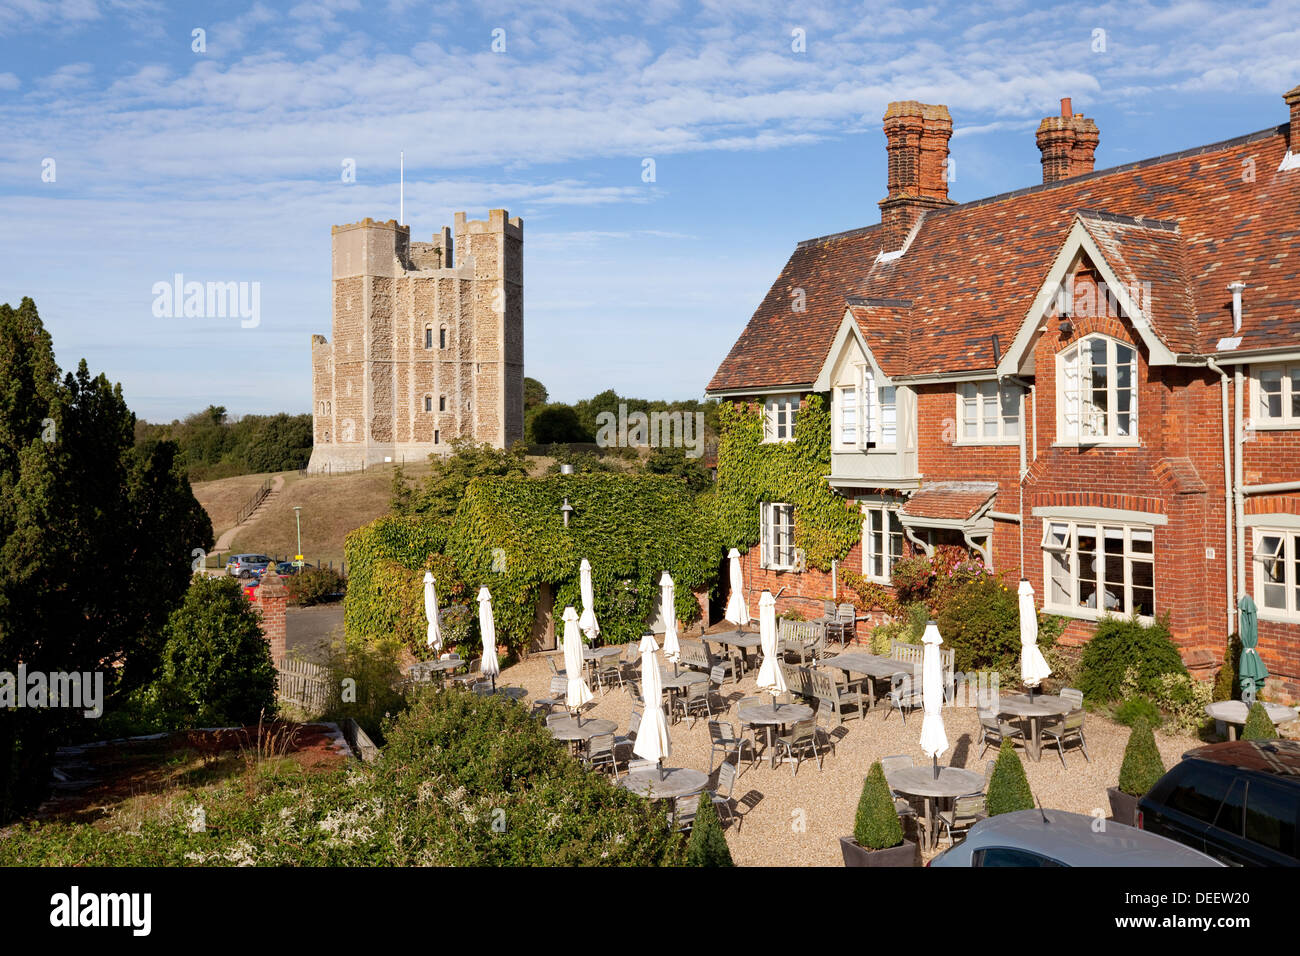 The Luxury Crown and Castle hotel with Orford castle in the background, Orford village, Suffolk UK Stock Photo